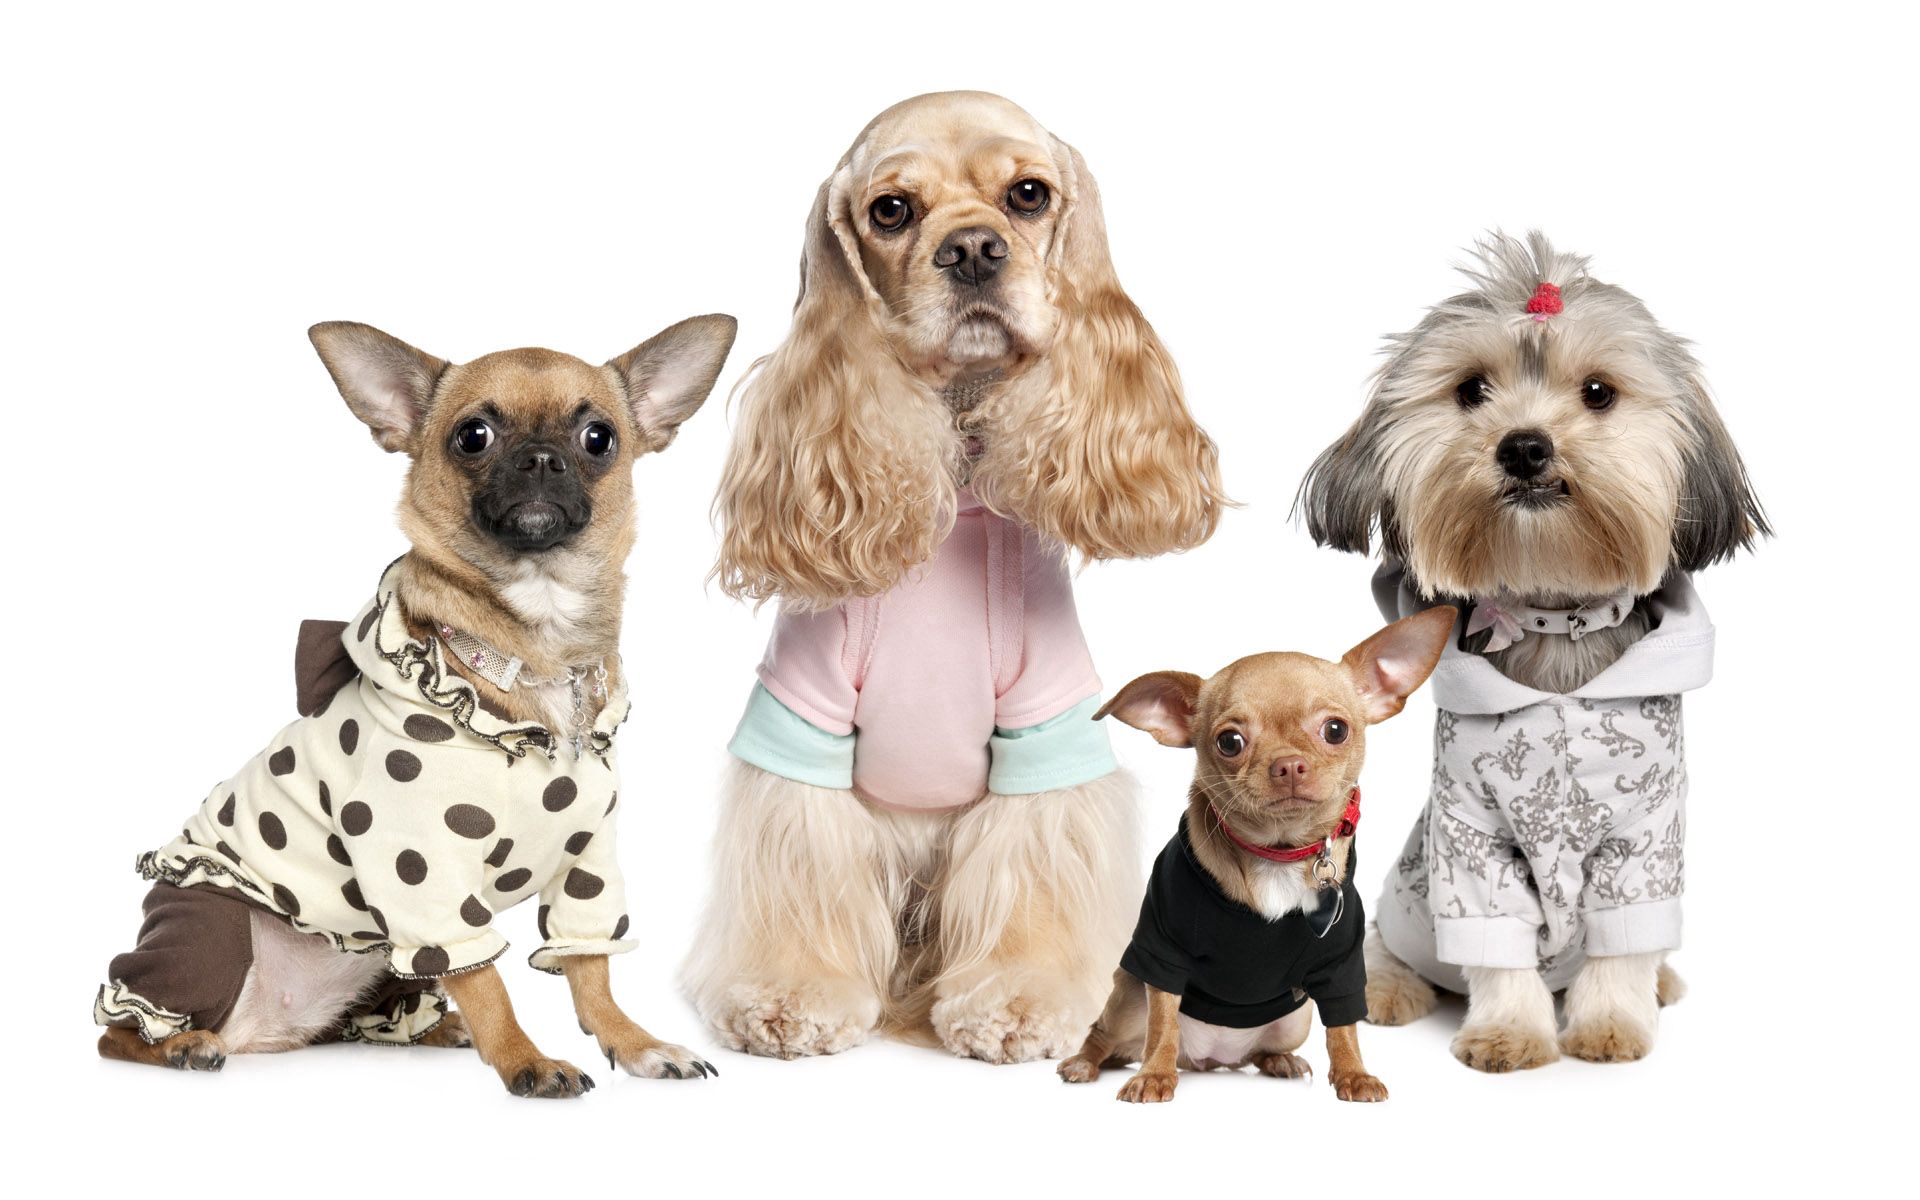 animals, dogs, yorkshire terrier, variety, chihuahua, varieties, costumes